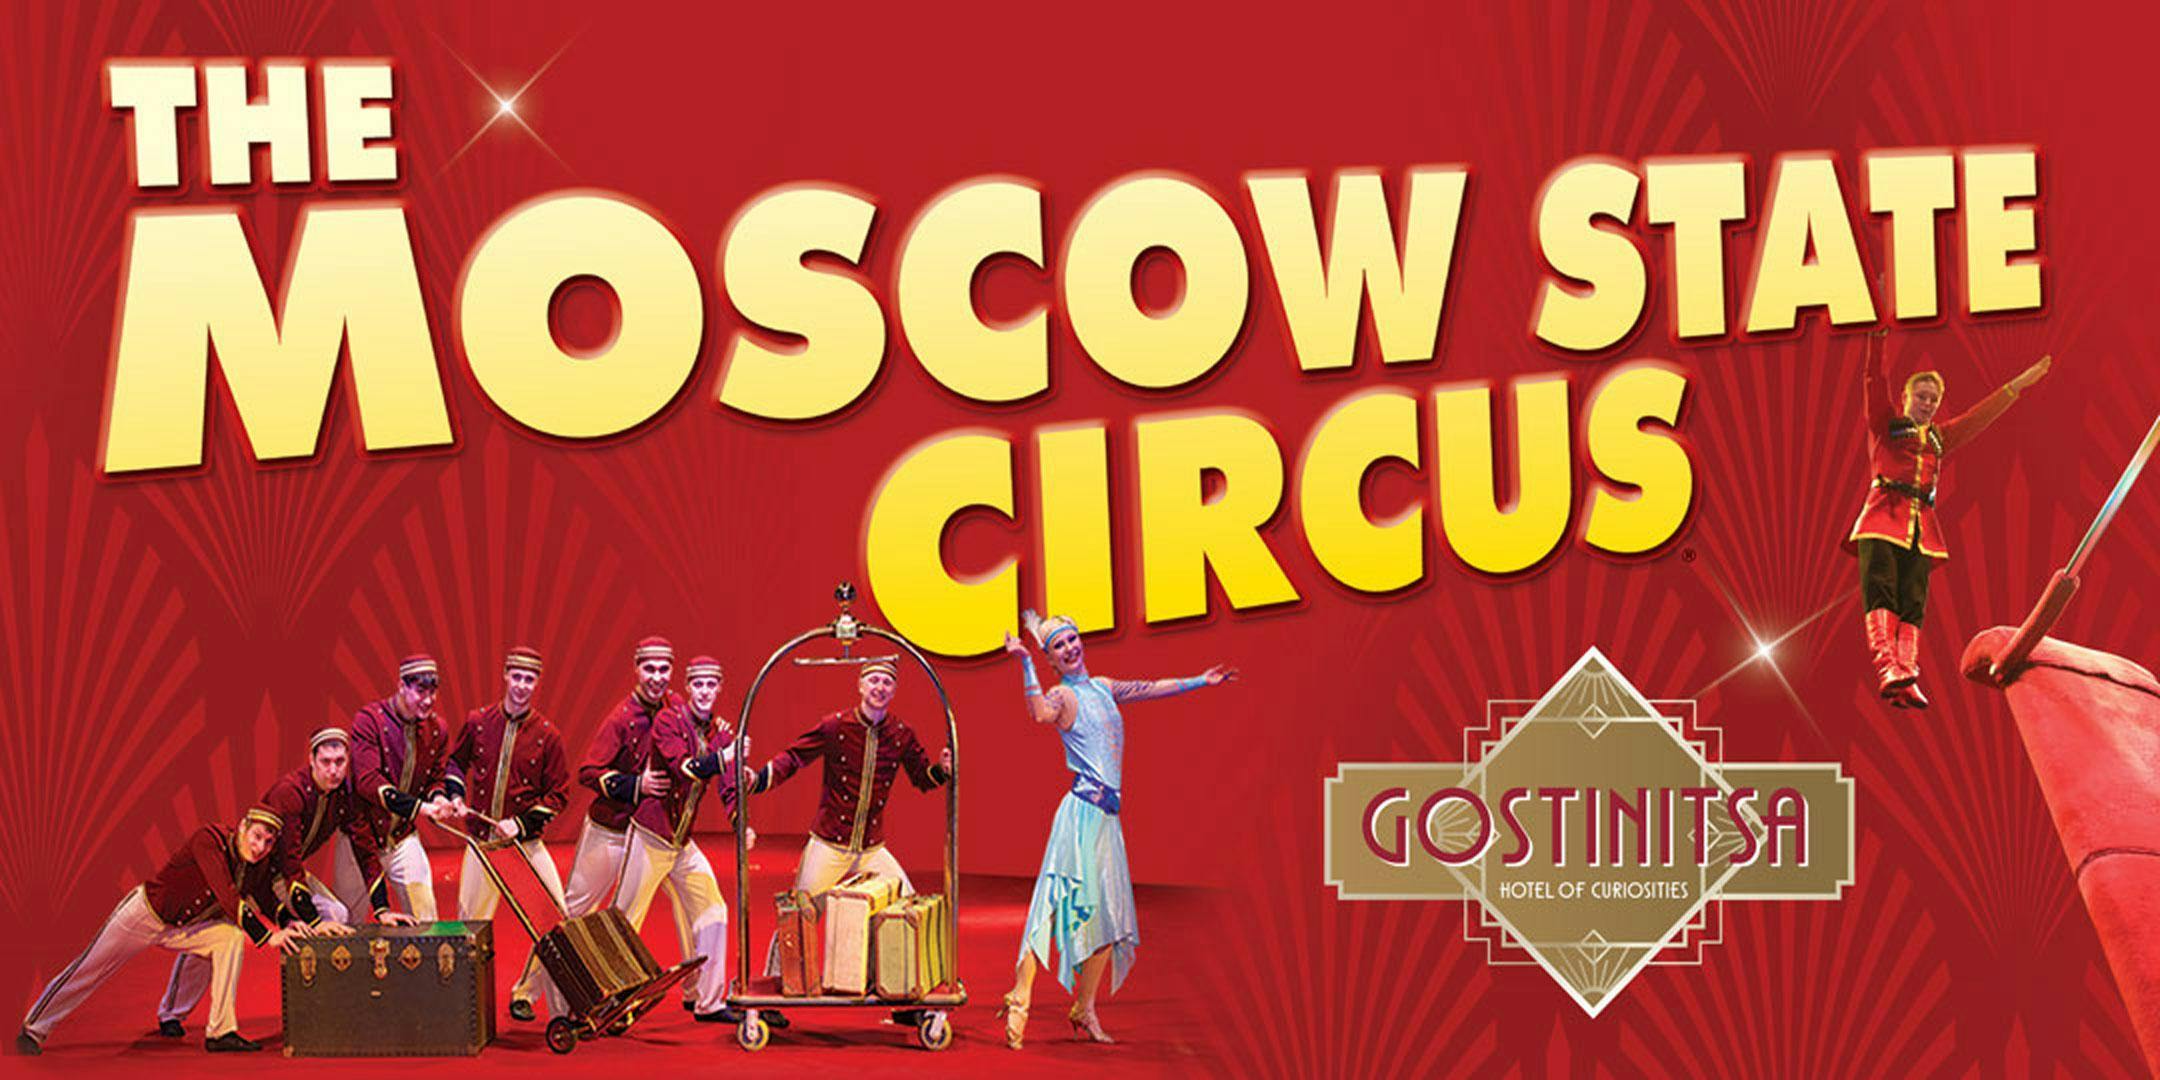 Moscow State Circus Presents GOSTINISTA - Aberdeen